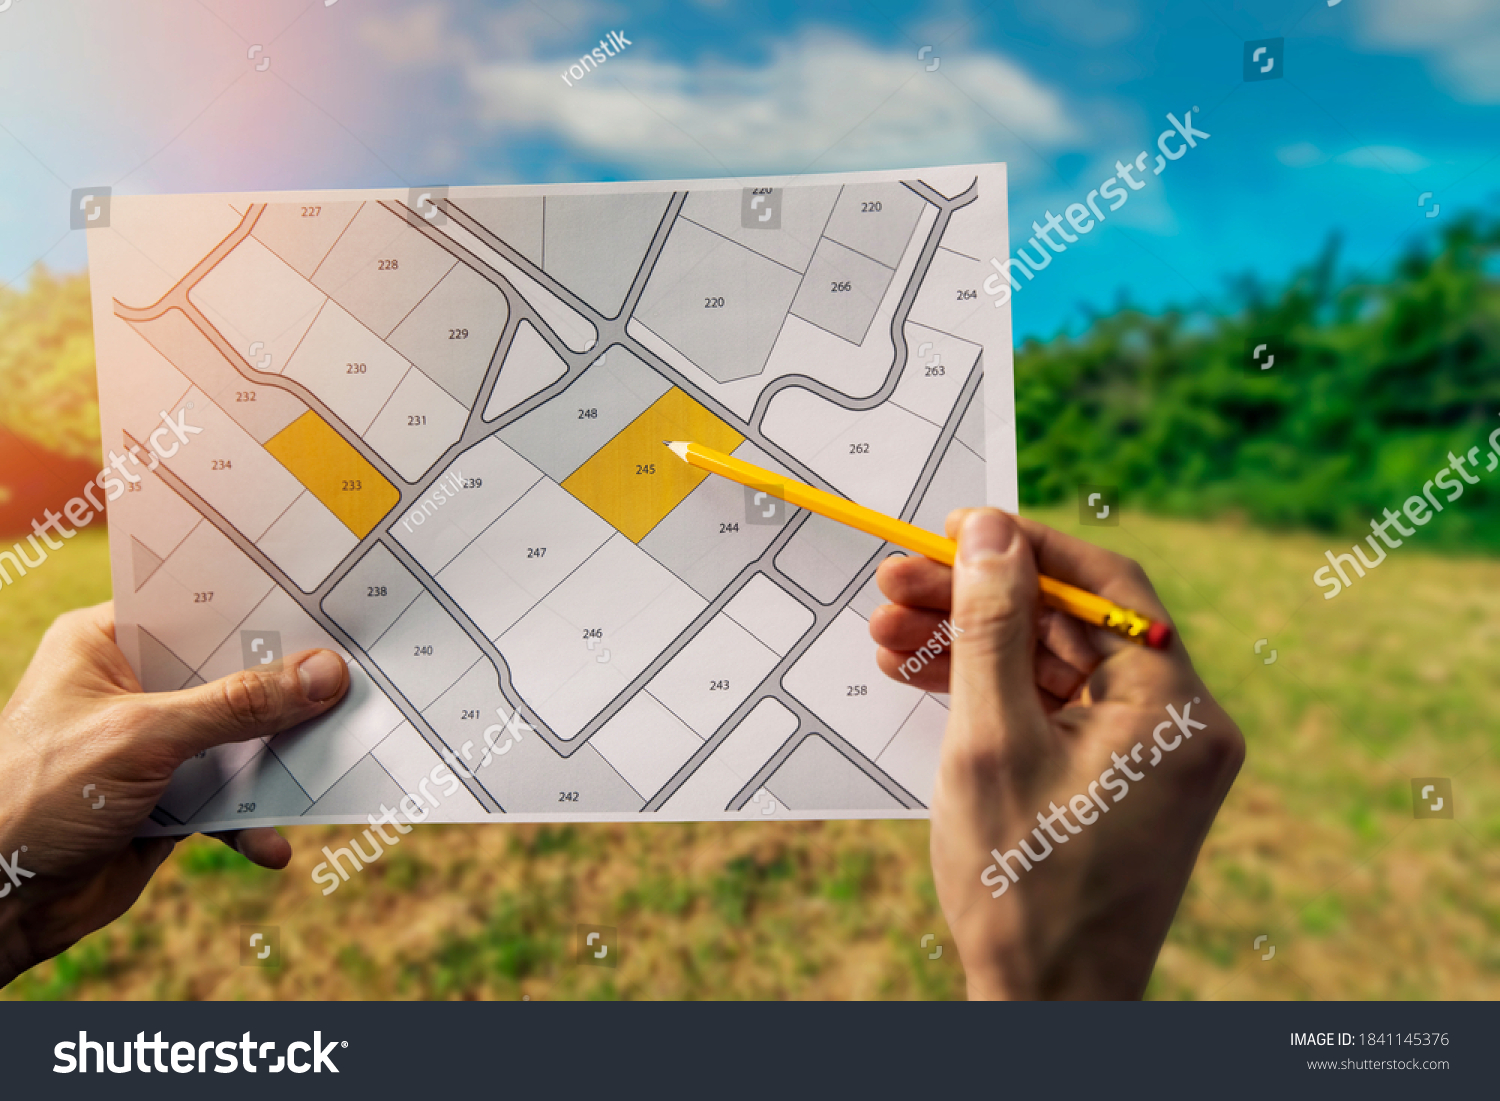 sale of building plot of land for house construction. cadastral map on field background #1841145376